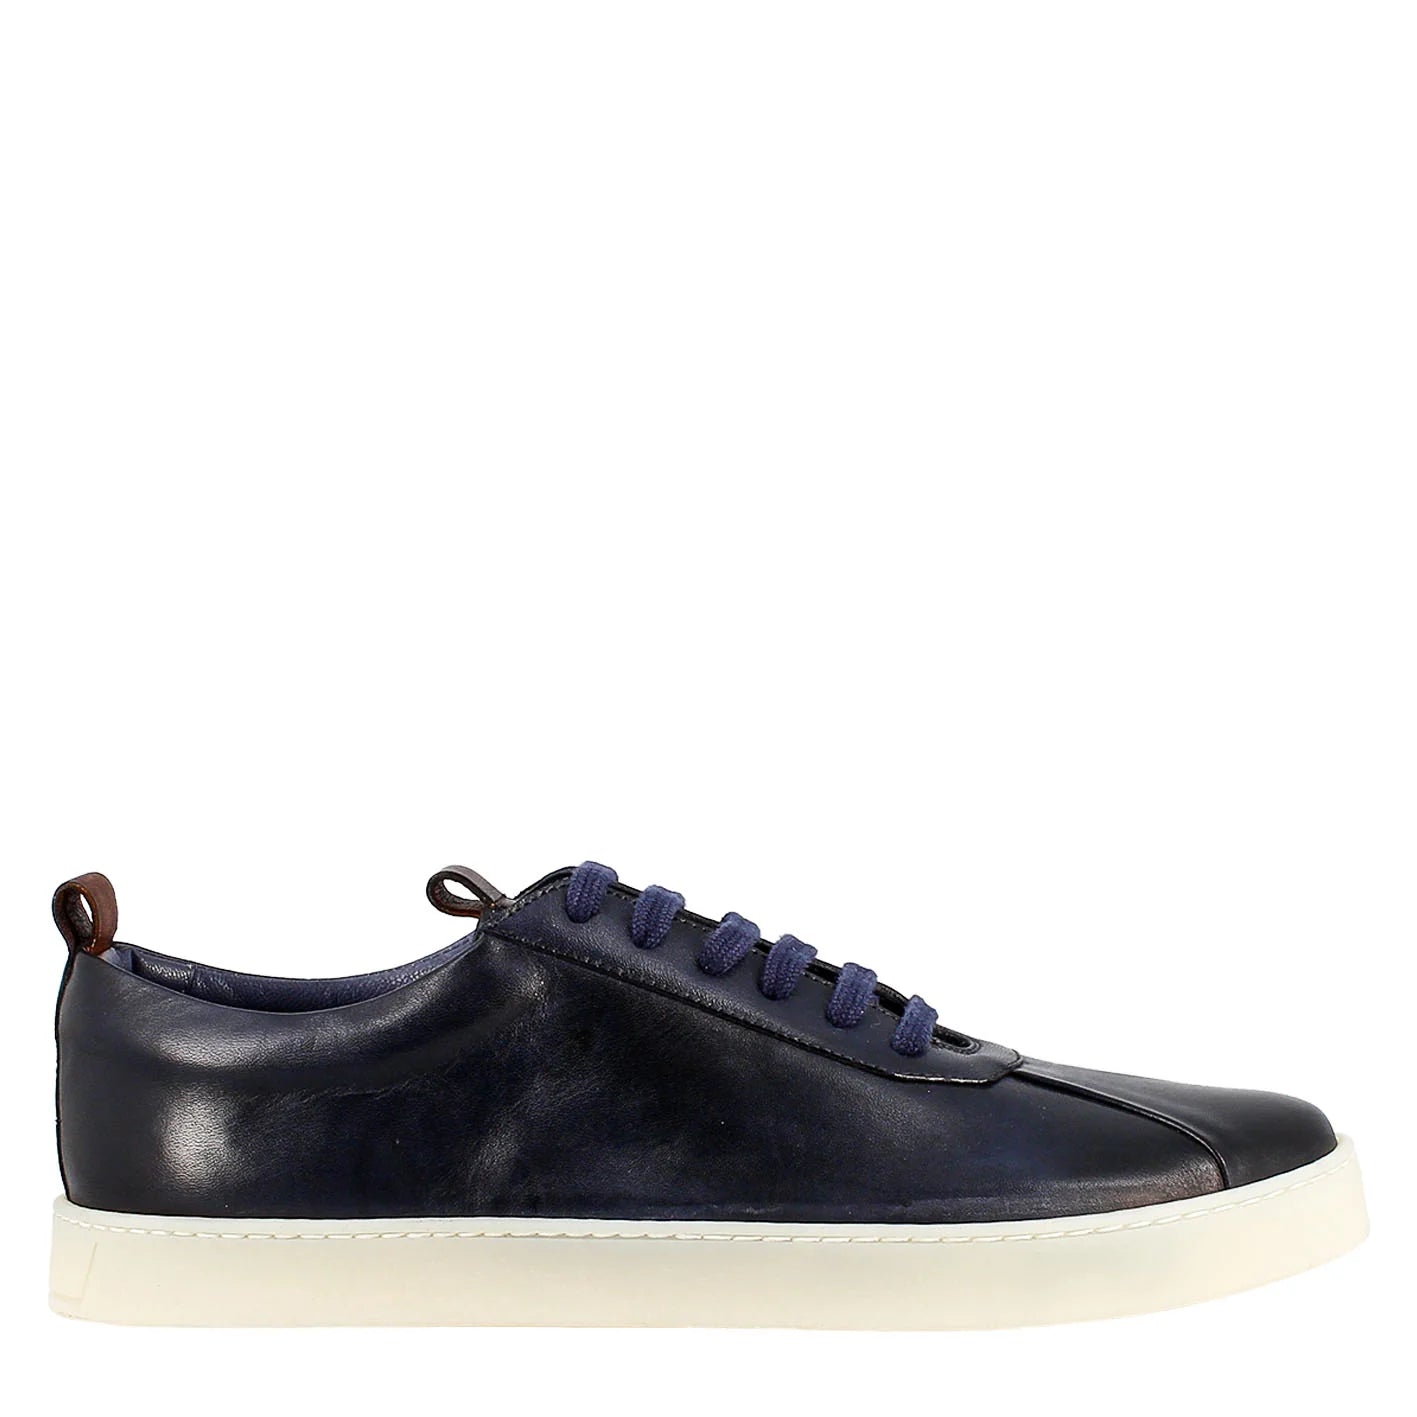 Blue Sneaker in smooth leather